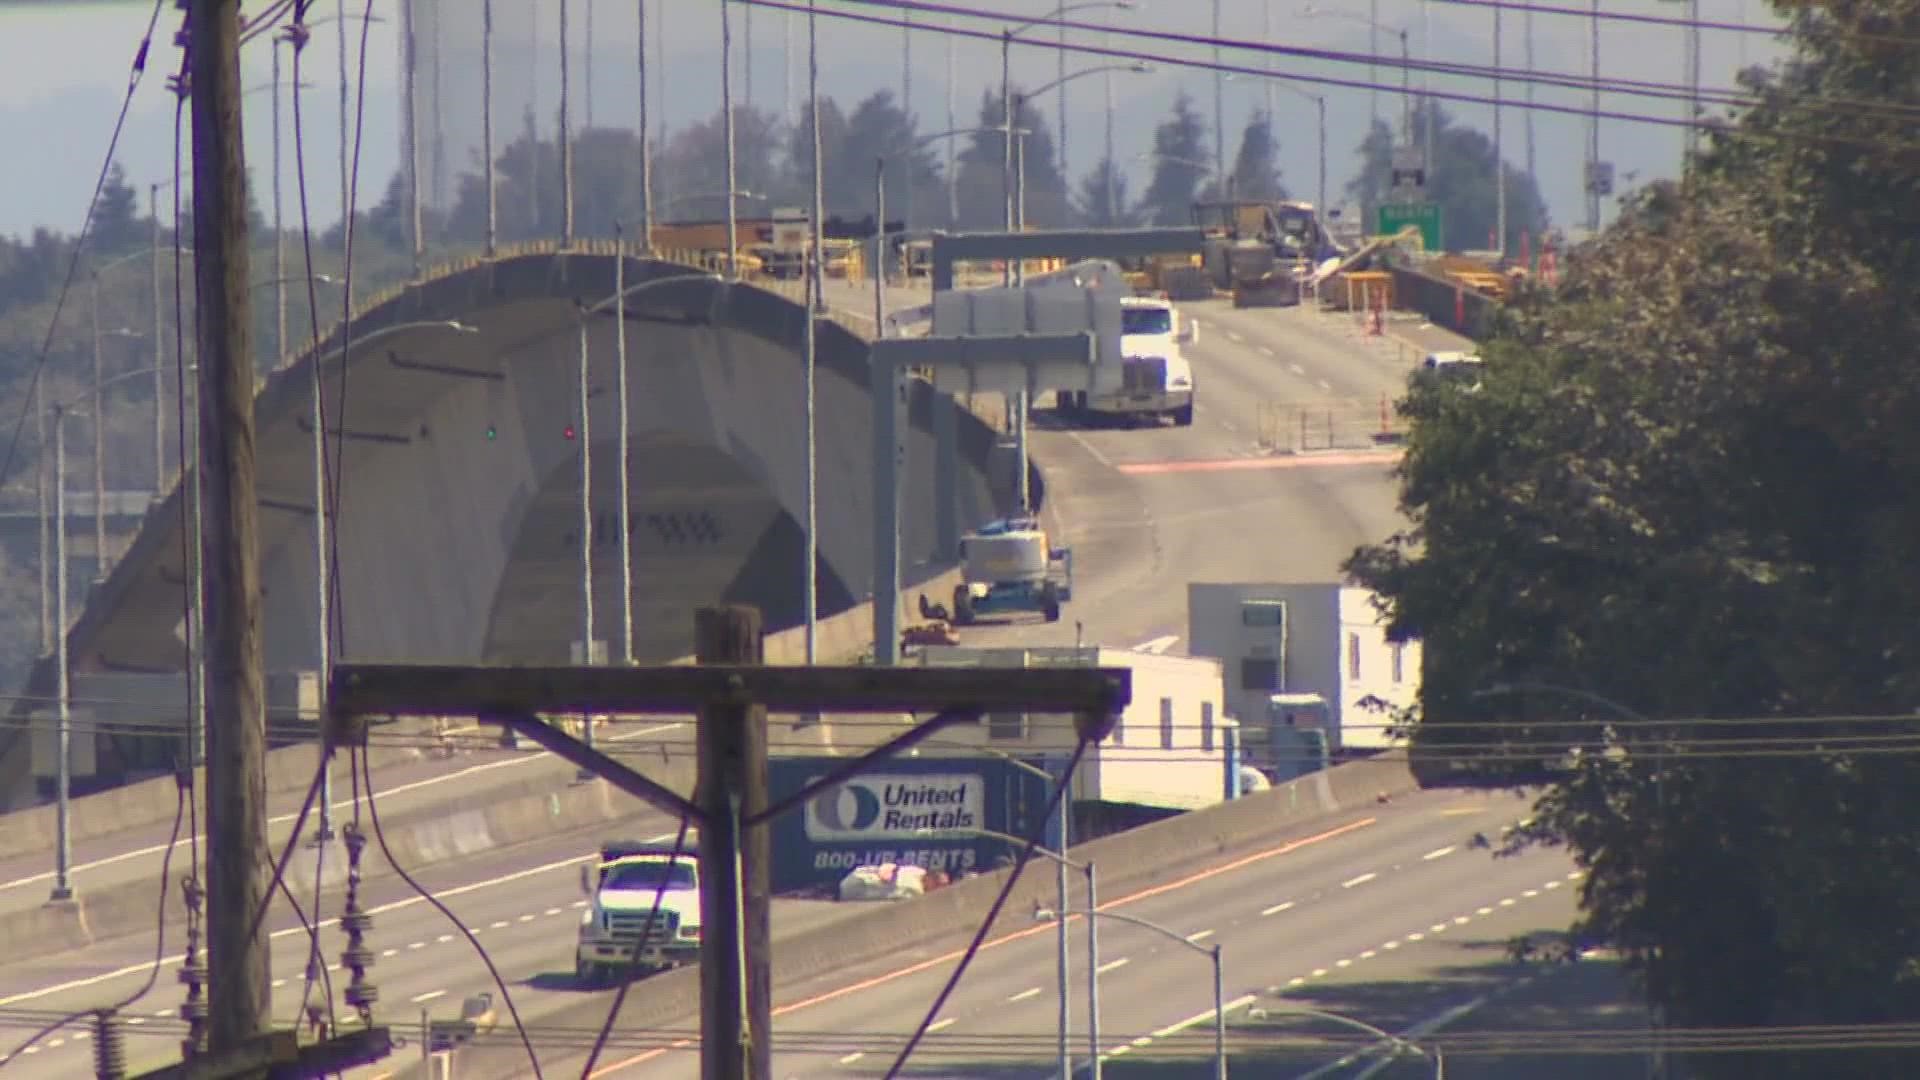 Some residents are hopeful regarding the scheduled reopening of the West Seattle Bridge, while others are skeptical.